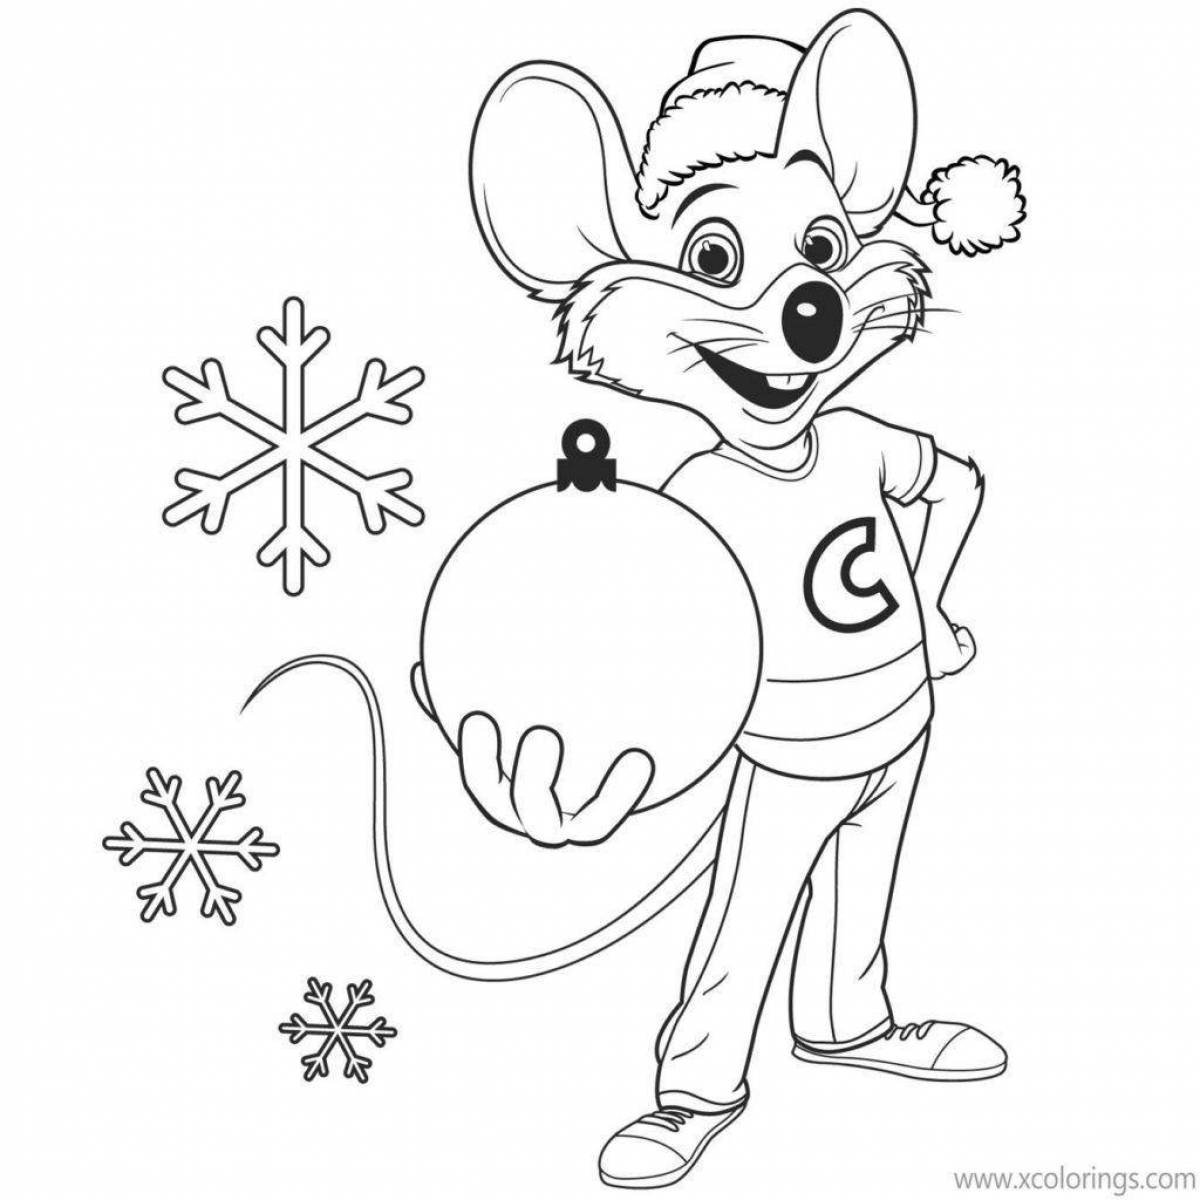 Colorful chucky cheese coloring page